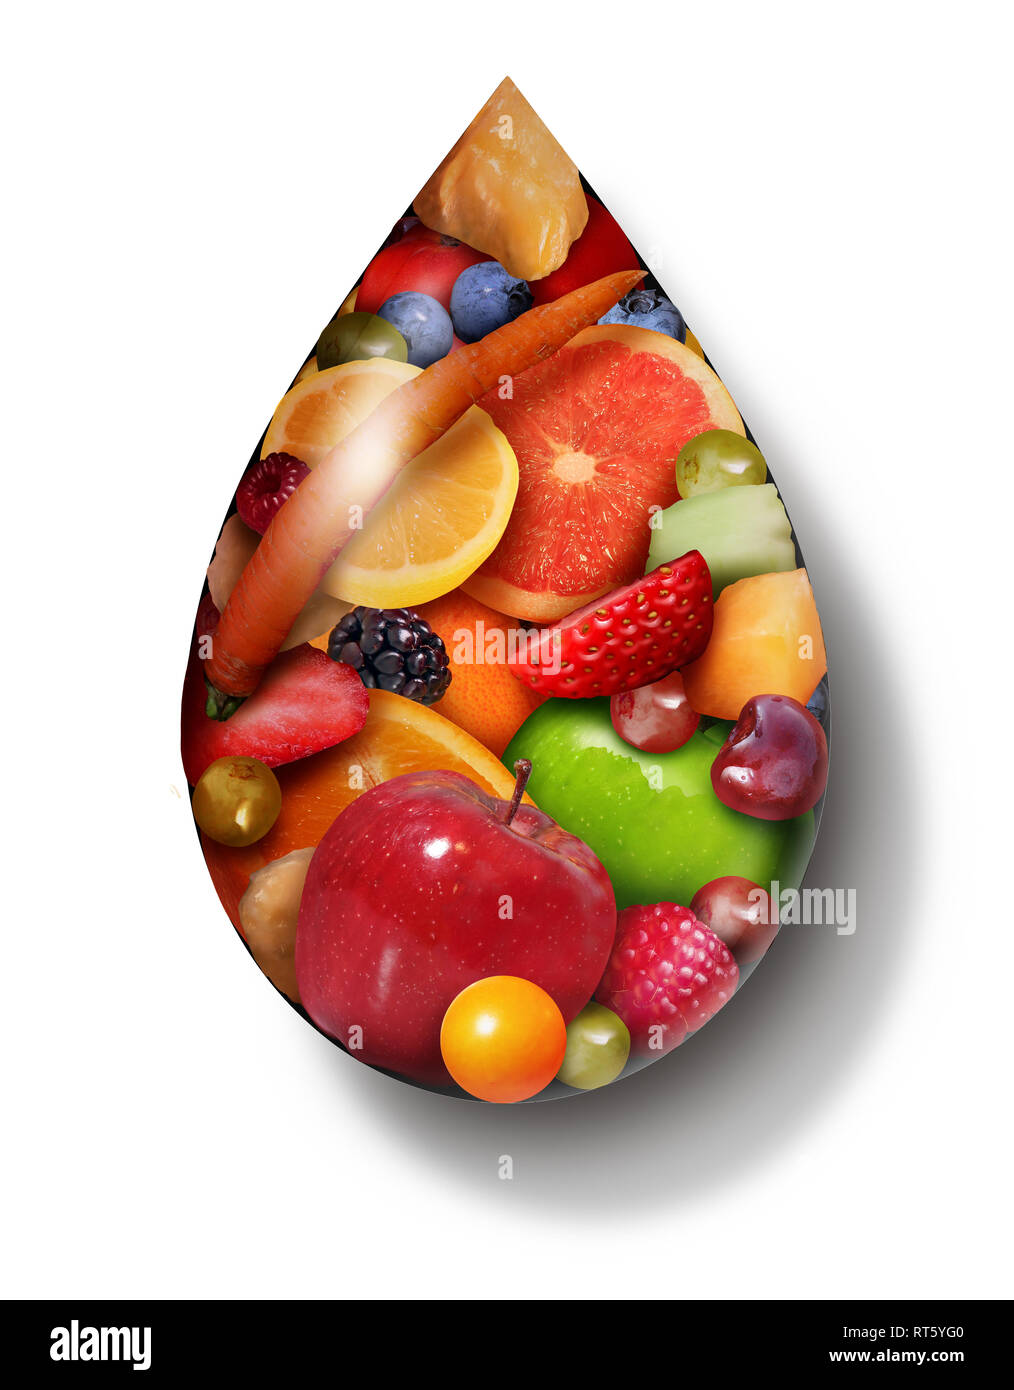 Fruit Juice drop as organic natural sweet produce as a symbol for a detox beverage or healthy food diet drink in a 3D illustration style. Stock Photo